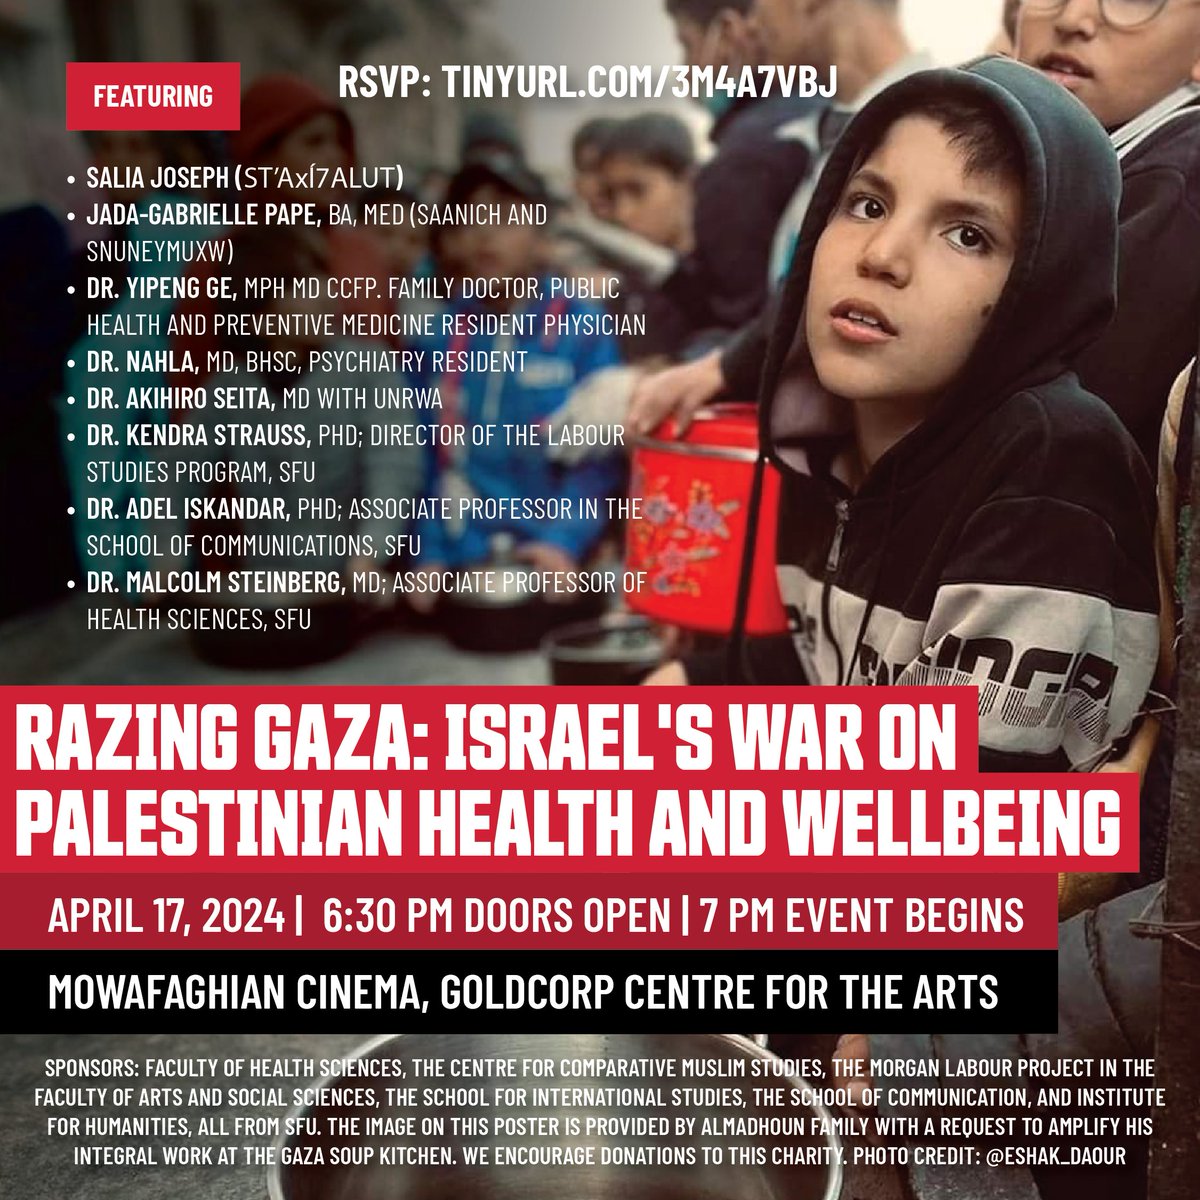 MAJOR EVENT! 'RAZING GAZA: Israel's War on Palestinian Health and Wellbeing' at @SFU on April 17 feat. Dr. Akihiro Seita of @UNRWA @yipengGe @SaliaJoy Jada-Gabrielle Pape, Dr. Nahla, @MinotaurLives , Kendra Strauss, and Dr. Malcolm Steinberg. RSVP: TINYURL.COM/3M4A7VBJ